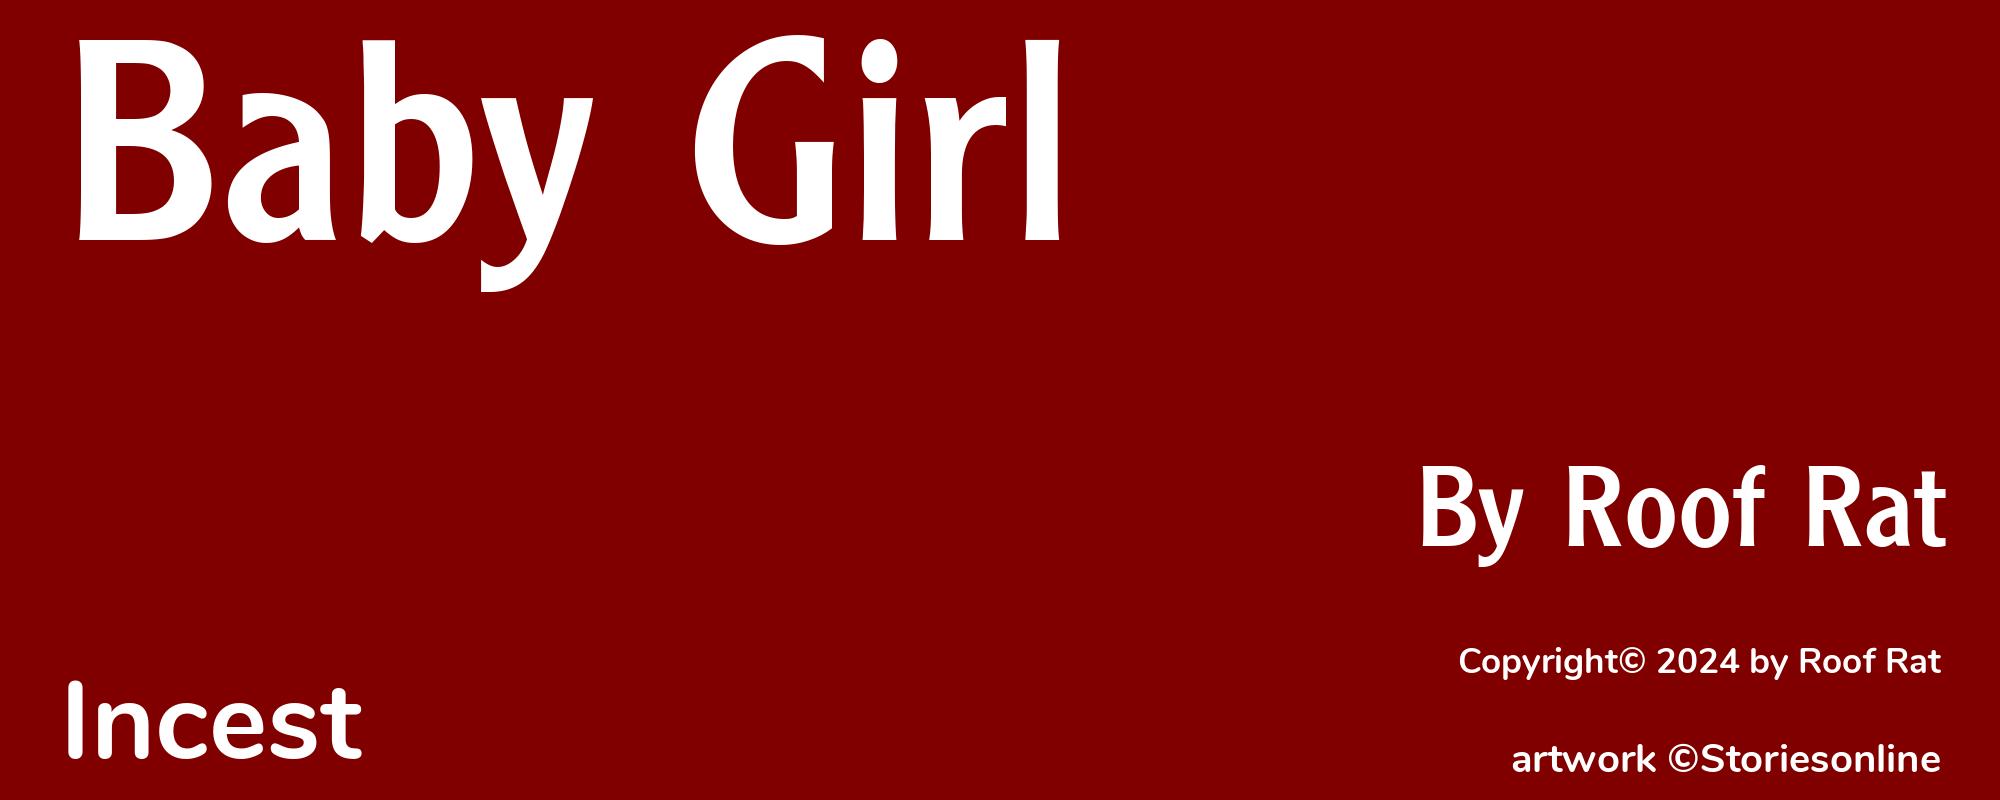 Baby Girl - Cover